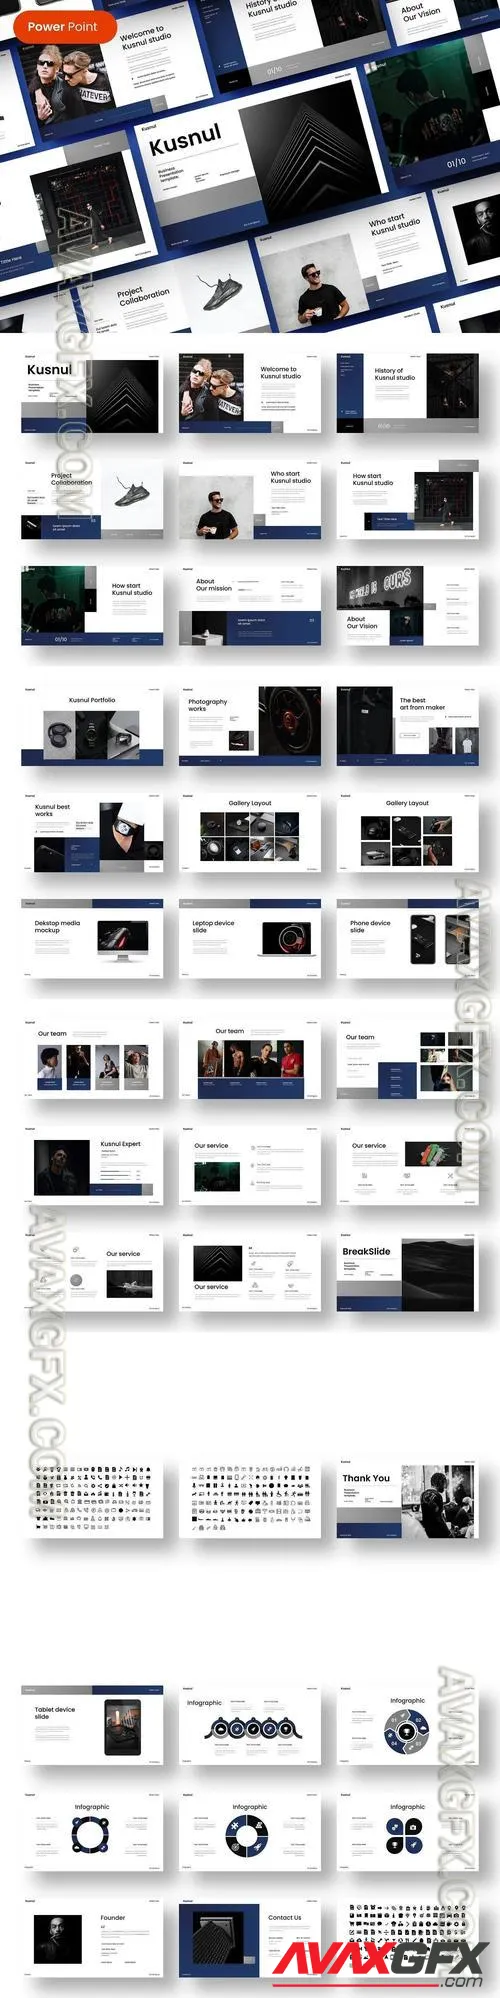 Kusnul - Business PowerPoint Template